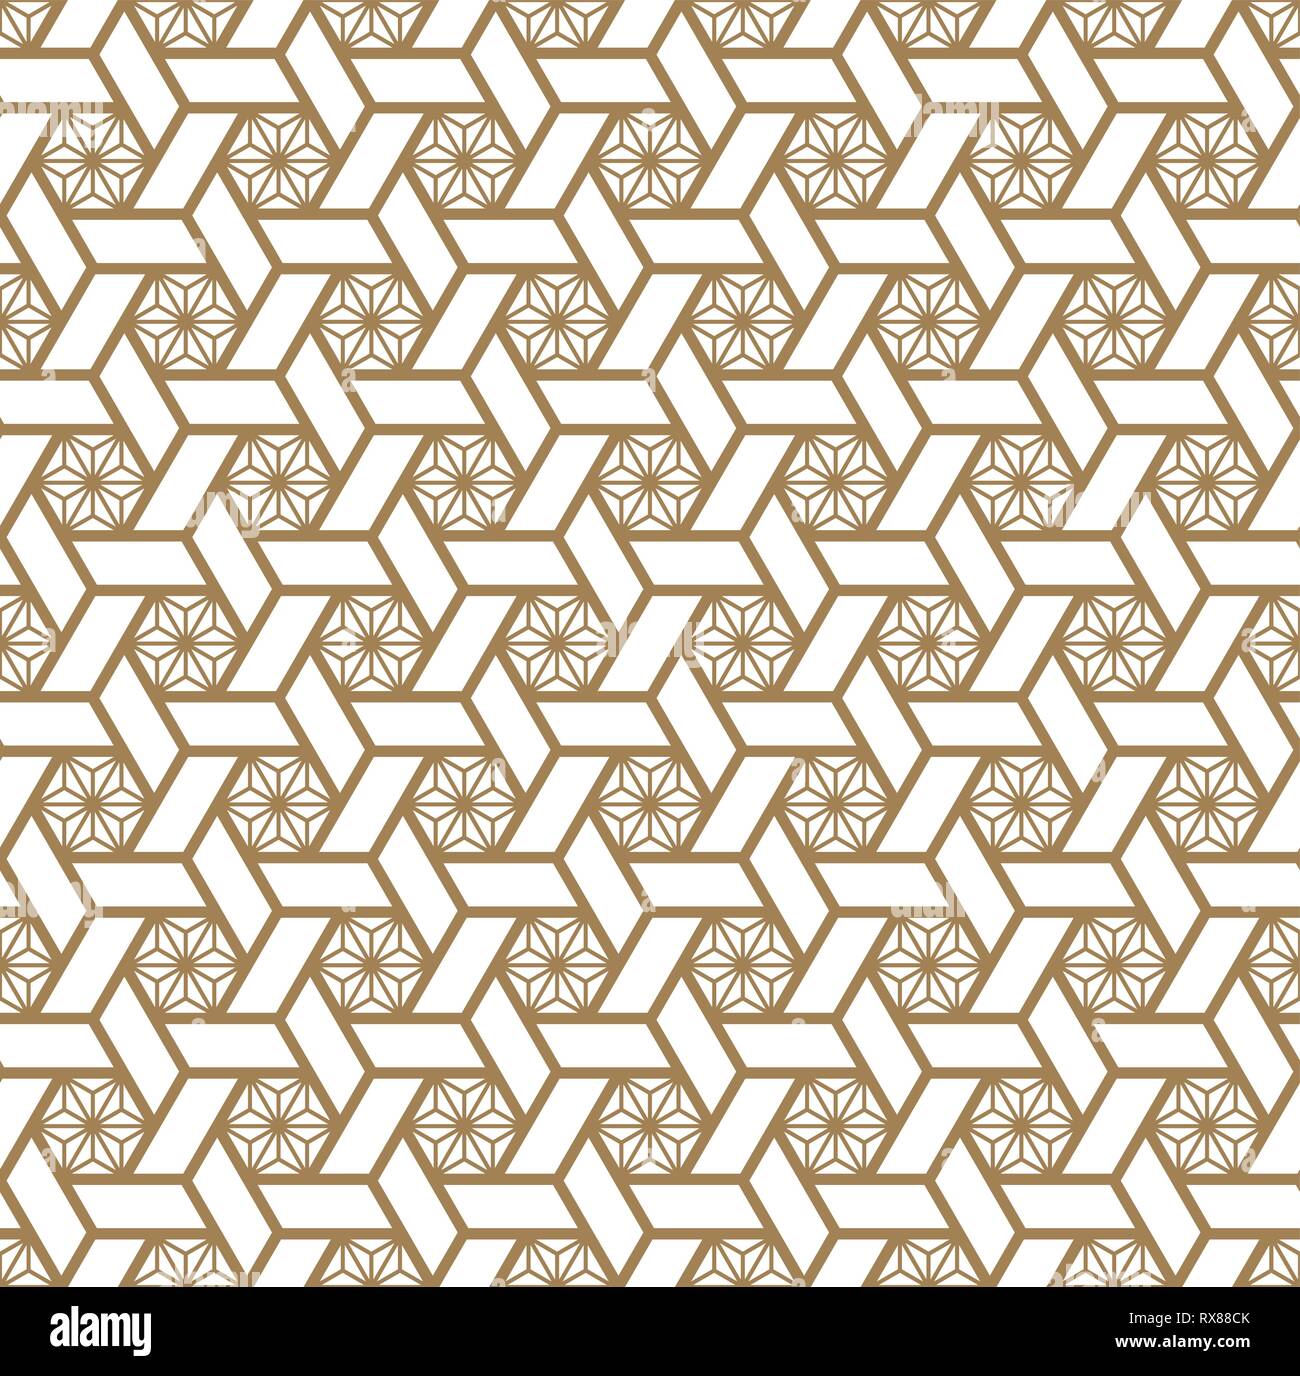 Seamless pattern japanese shoji kumiko.For template,fabric,textile,wrapping paper,laser cutting and engraving. Japanese pattern background vector. Stock Vector